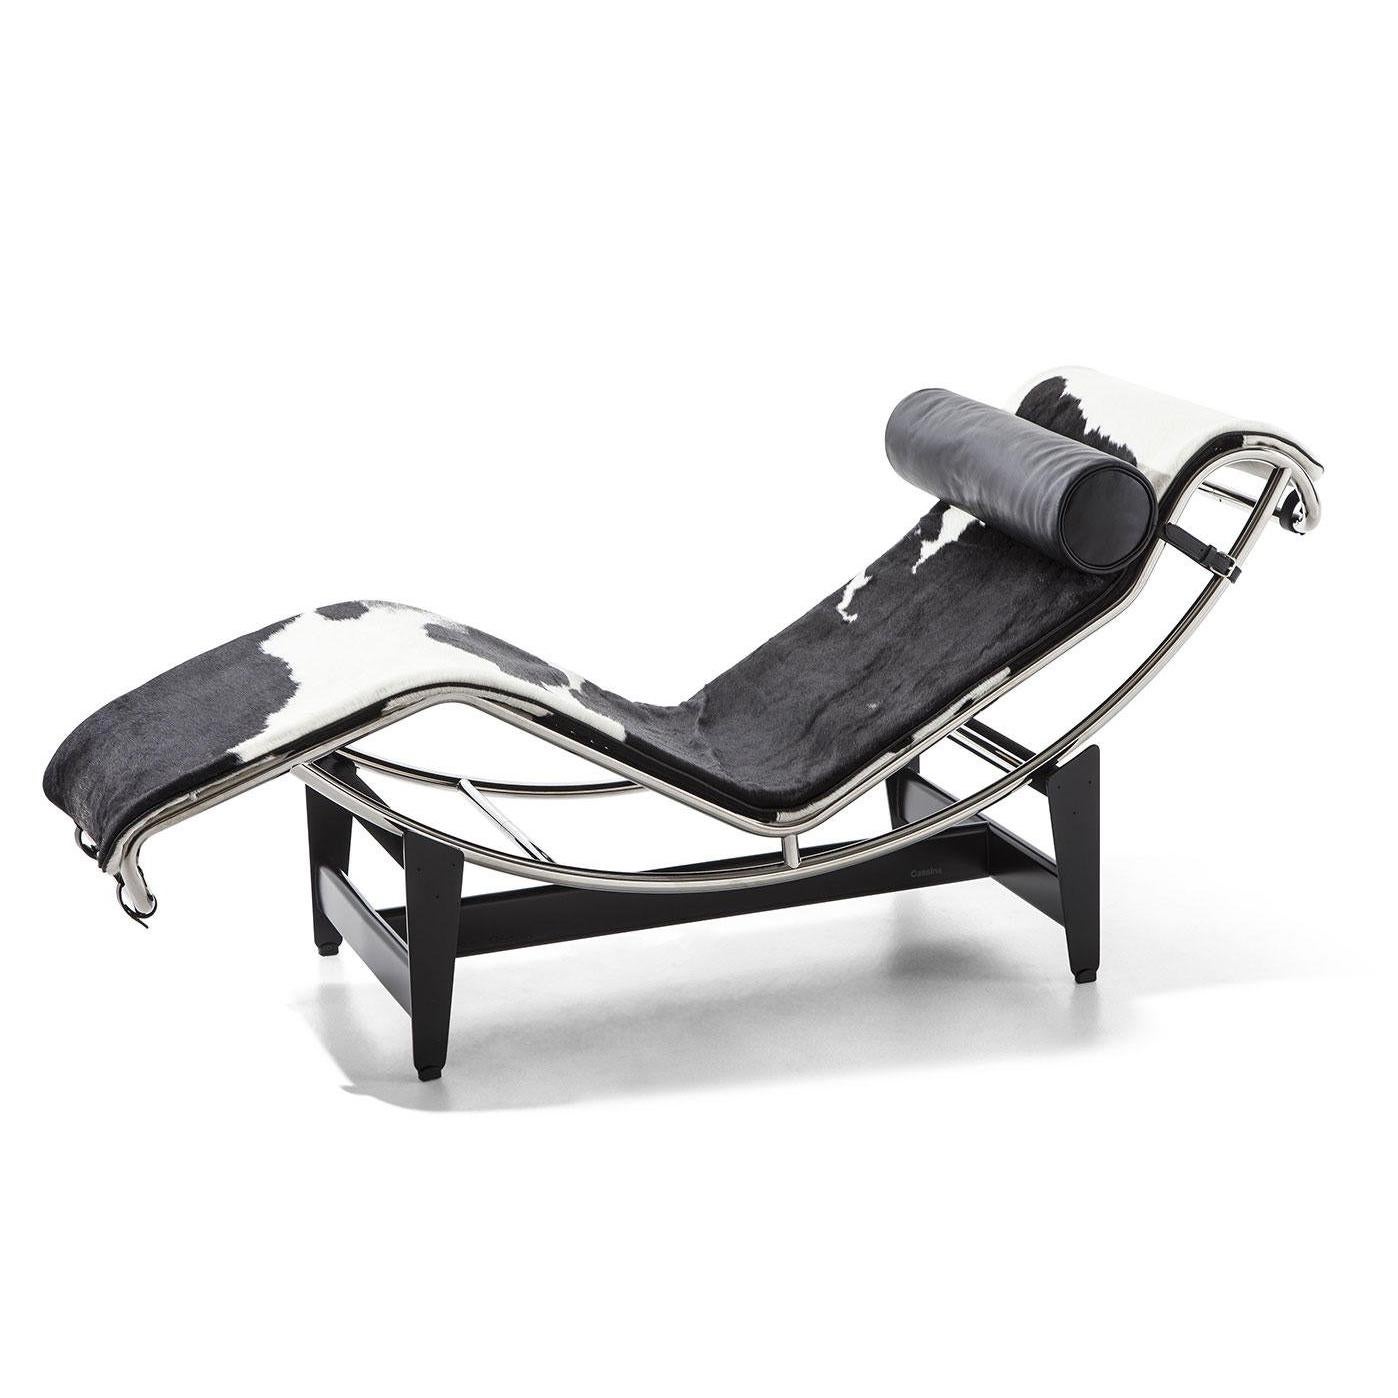 Chaise lounge designed by Le Corbusier, Pierre Jeanneret, Charlotte Perriand in 1928.
Manufactured by Cassina in Italy.

Chaise lounge with adjustable polished trivalent chrome plated (CR3) steel frame. Black enamel steel base.

Designed in 1928